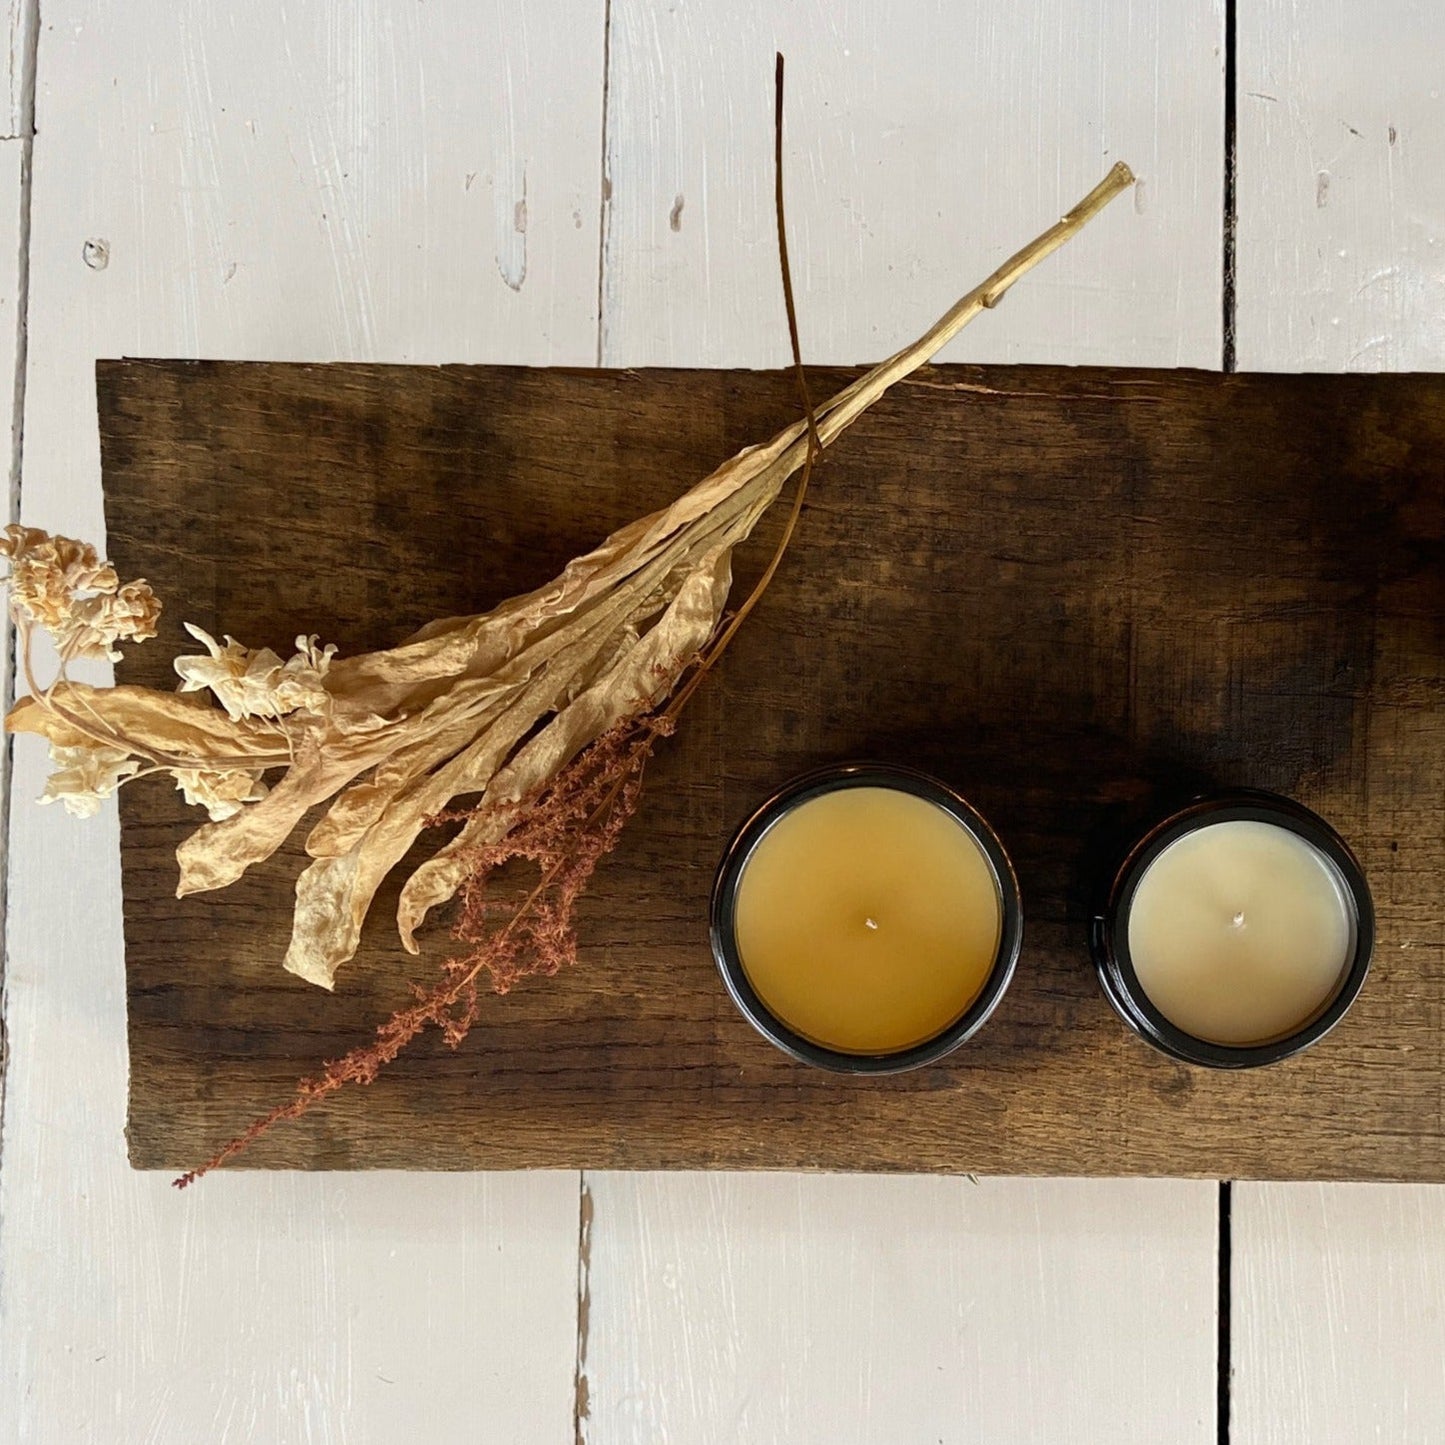 Brighton All Natural Candle Making Workshop | Wednesday 13th September, 7:00pm